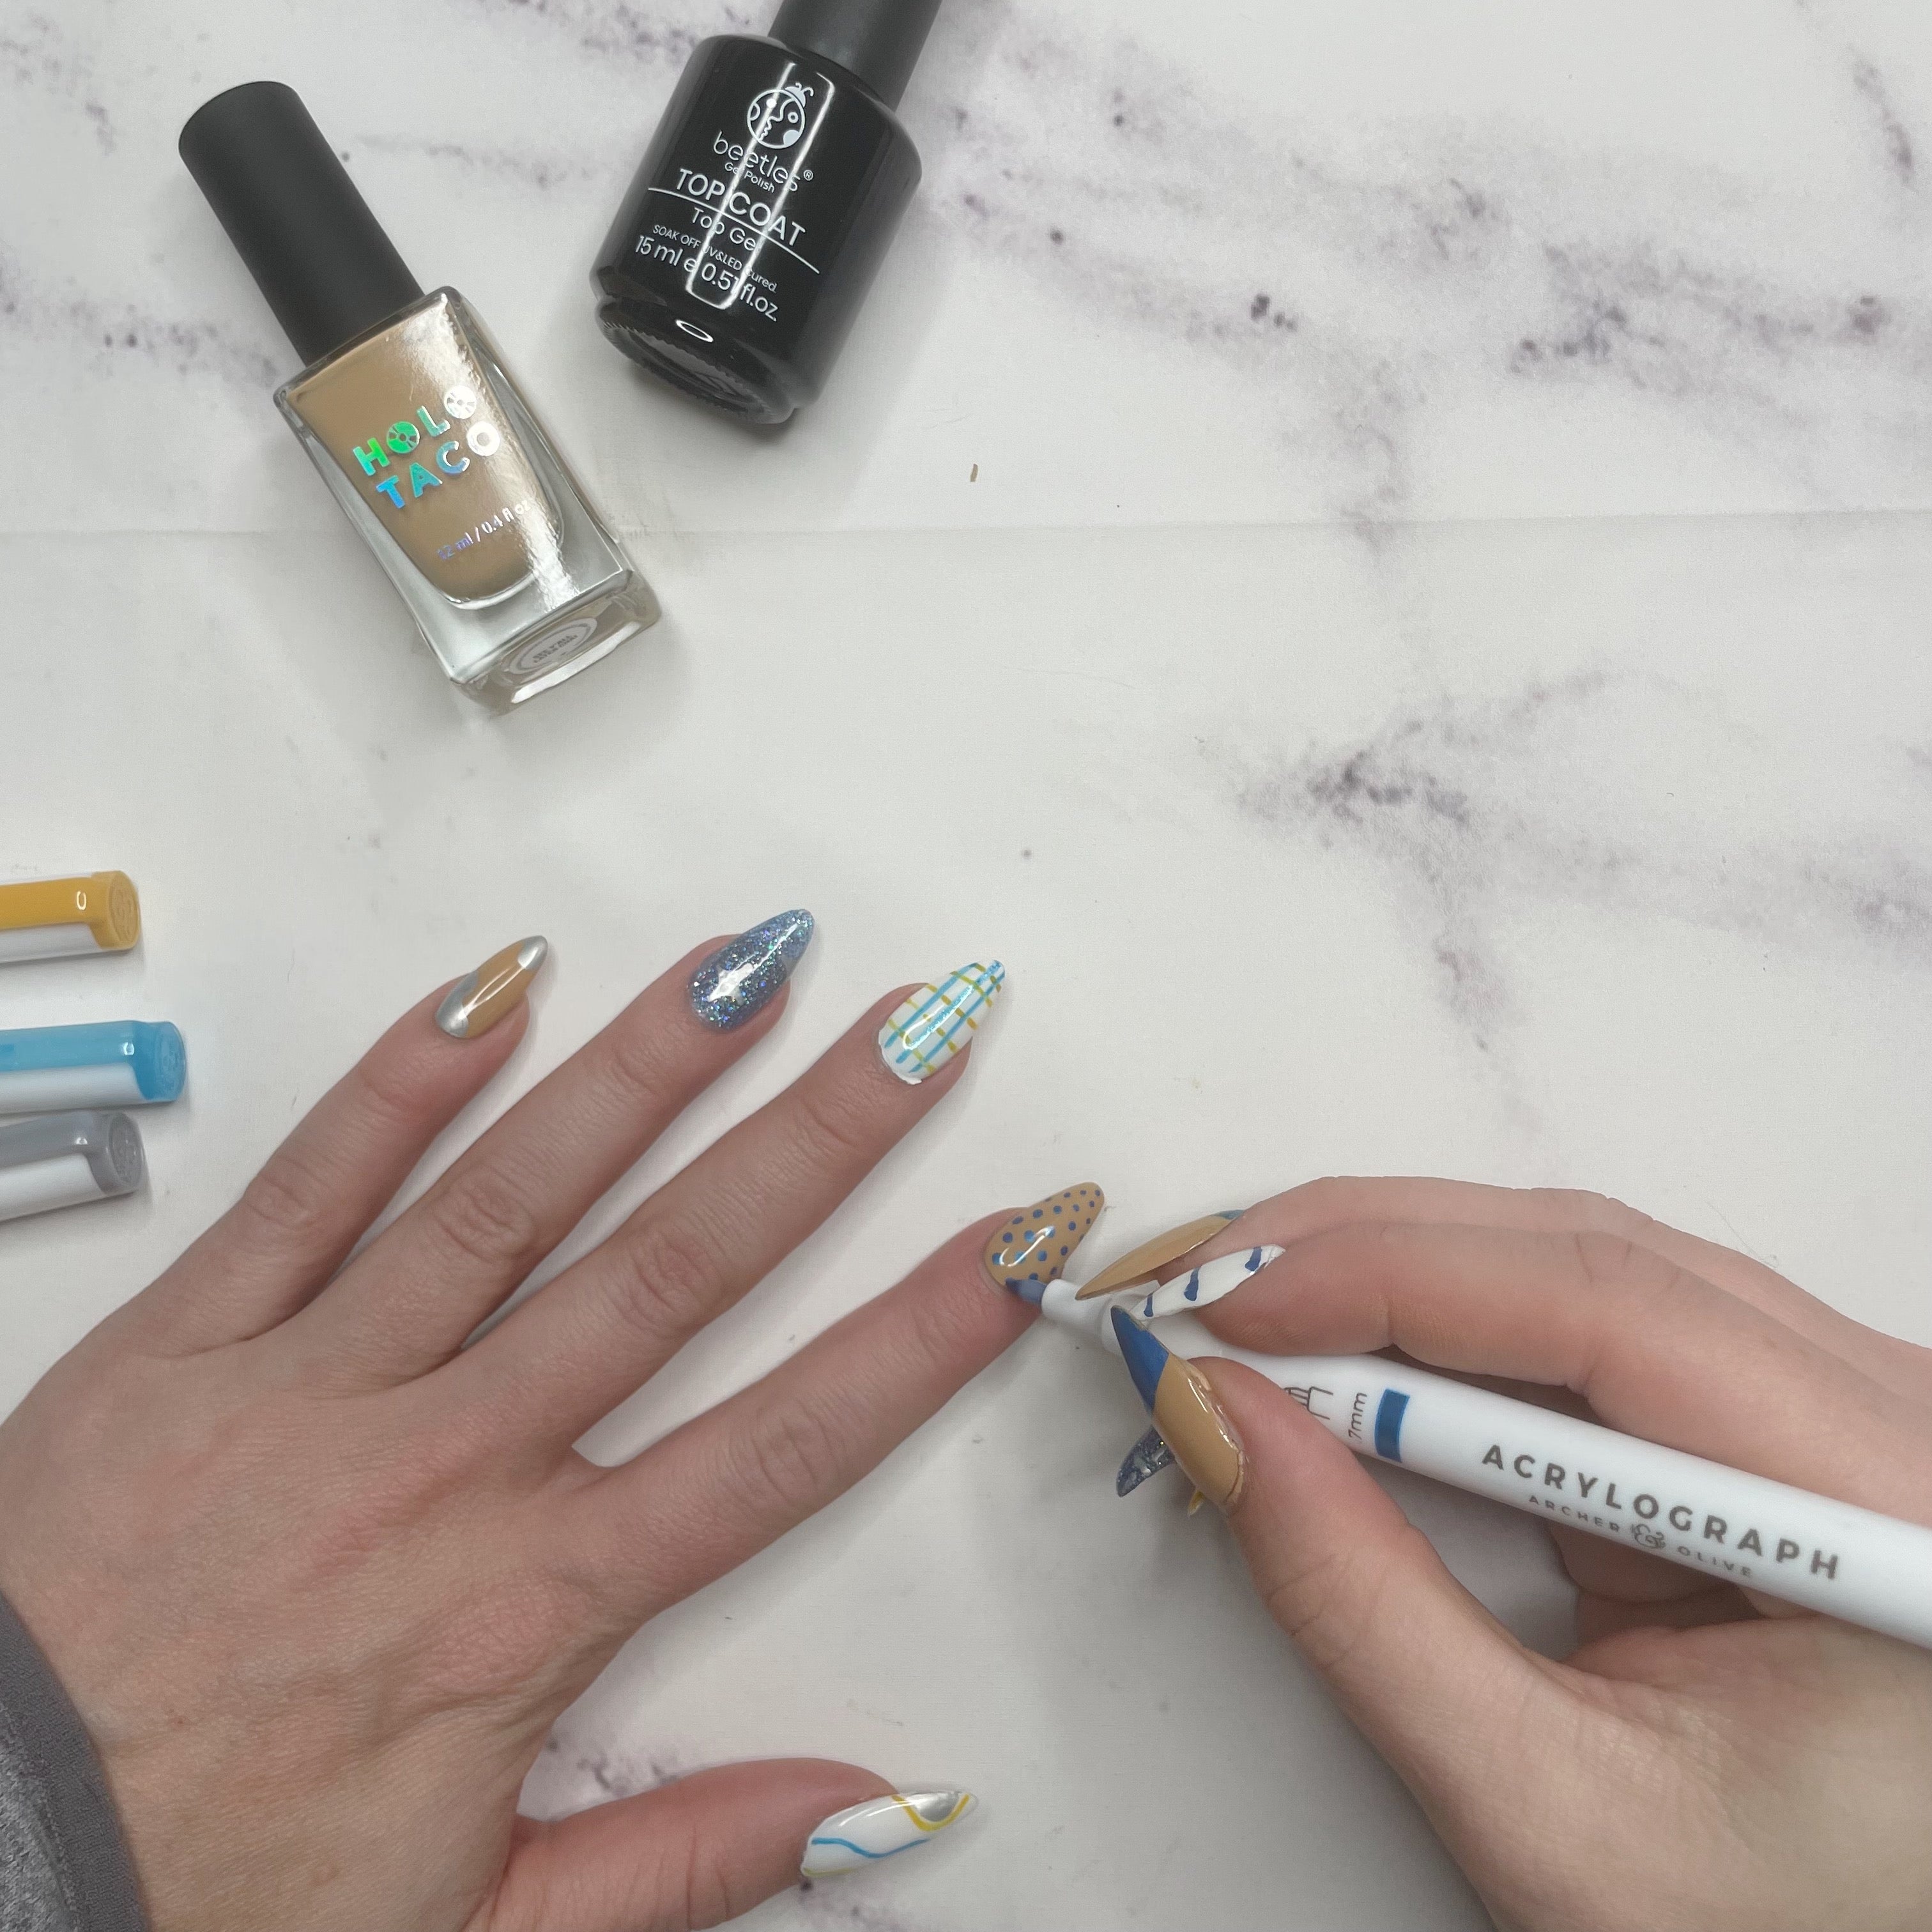 Using acrylographs to draw design on nails